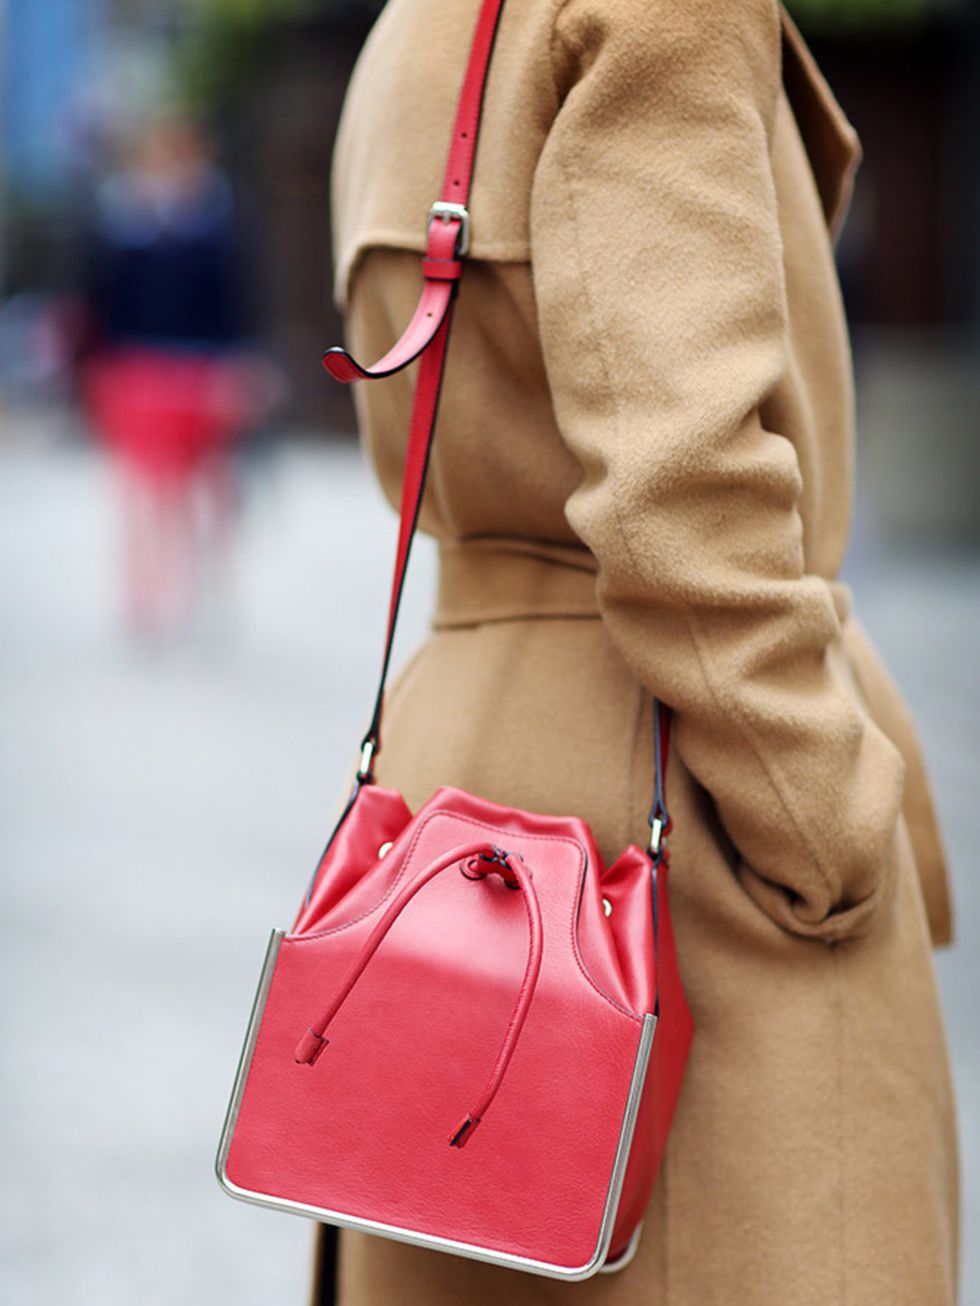 Lorraine Candy, Editor-in-Chief

Joseph coat and Carven bag.